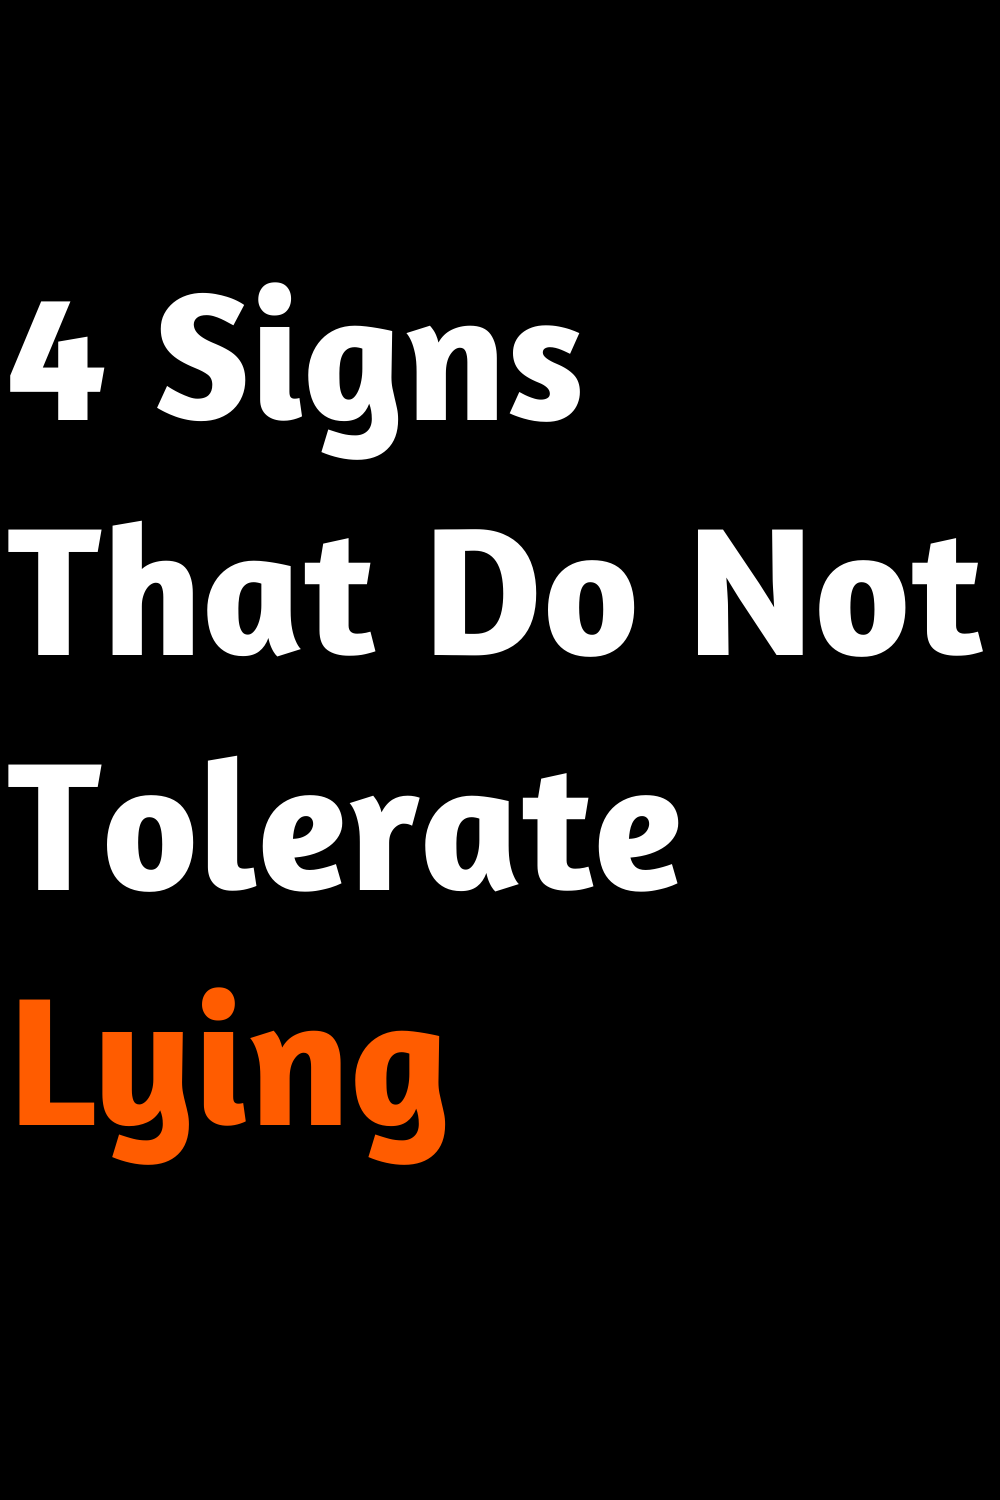 4 Signs That Do Not Tolerate Lying